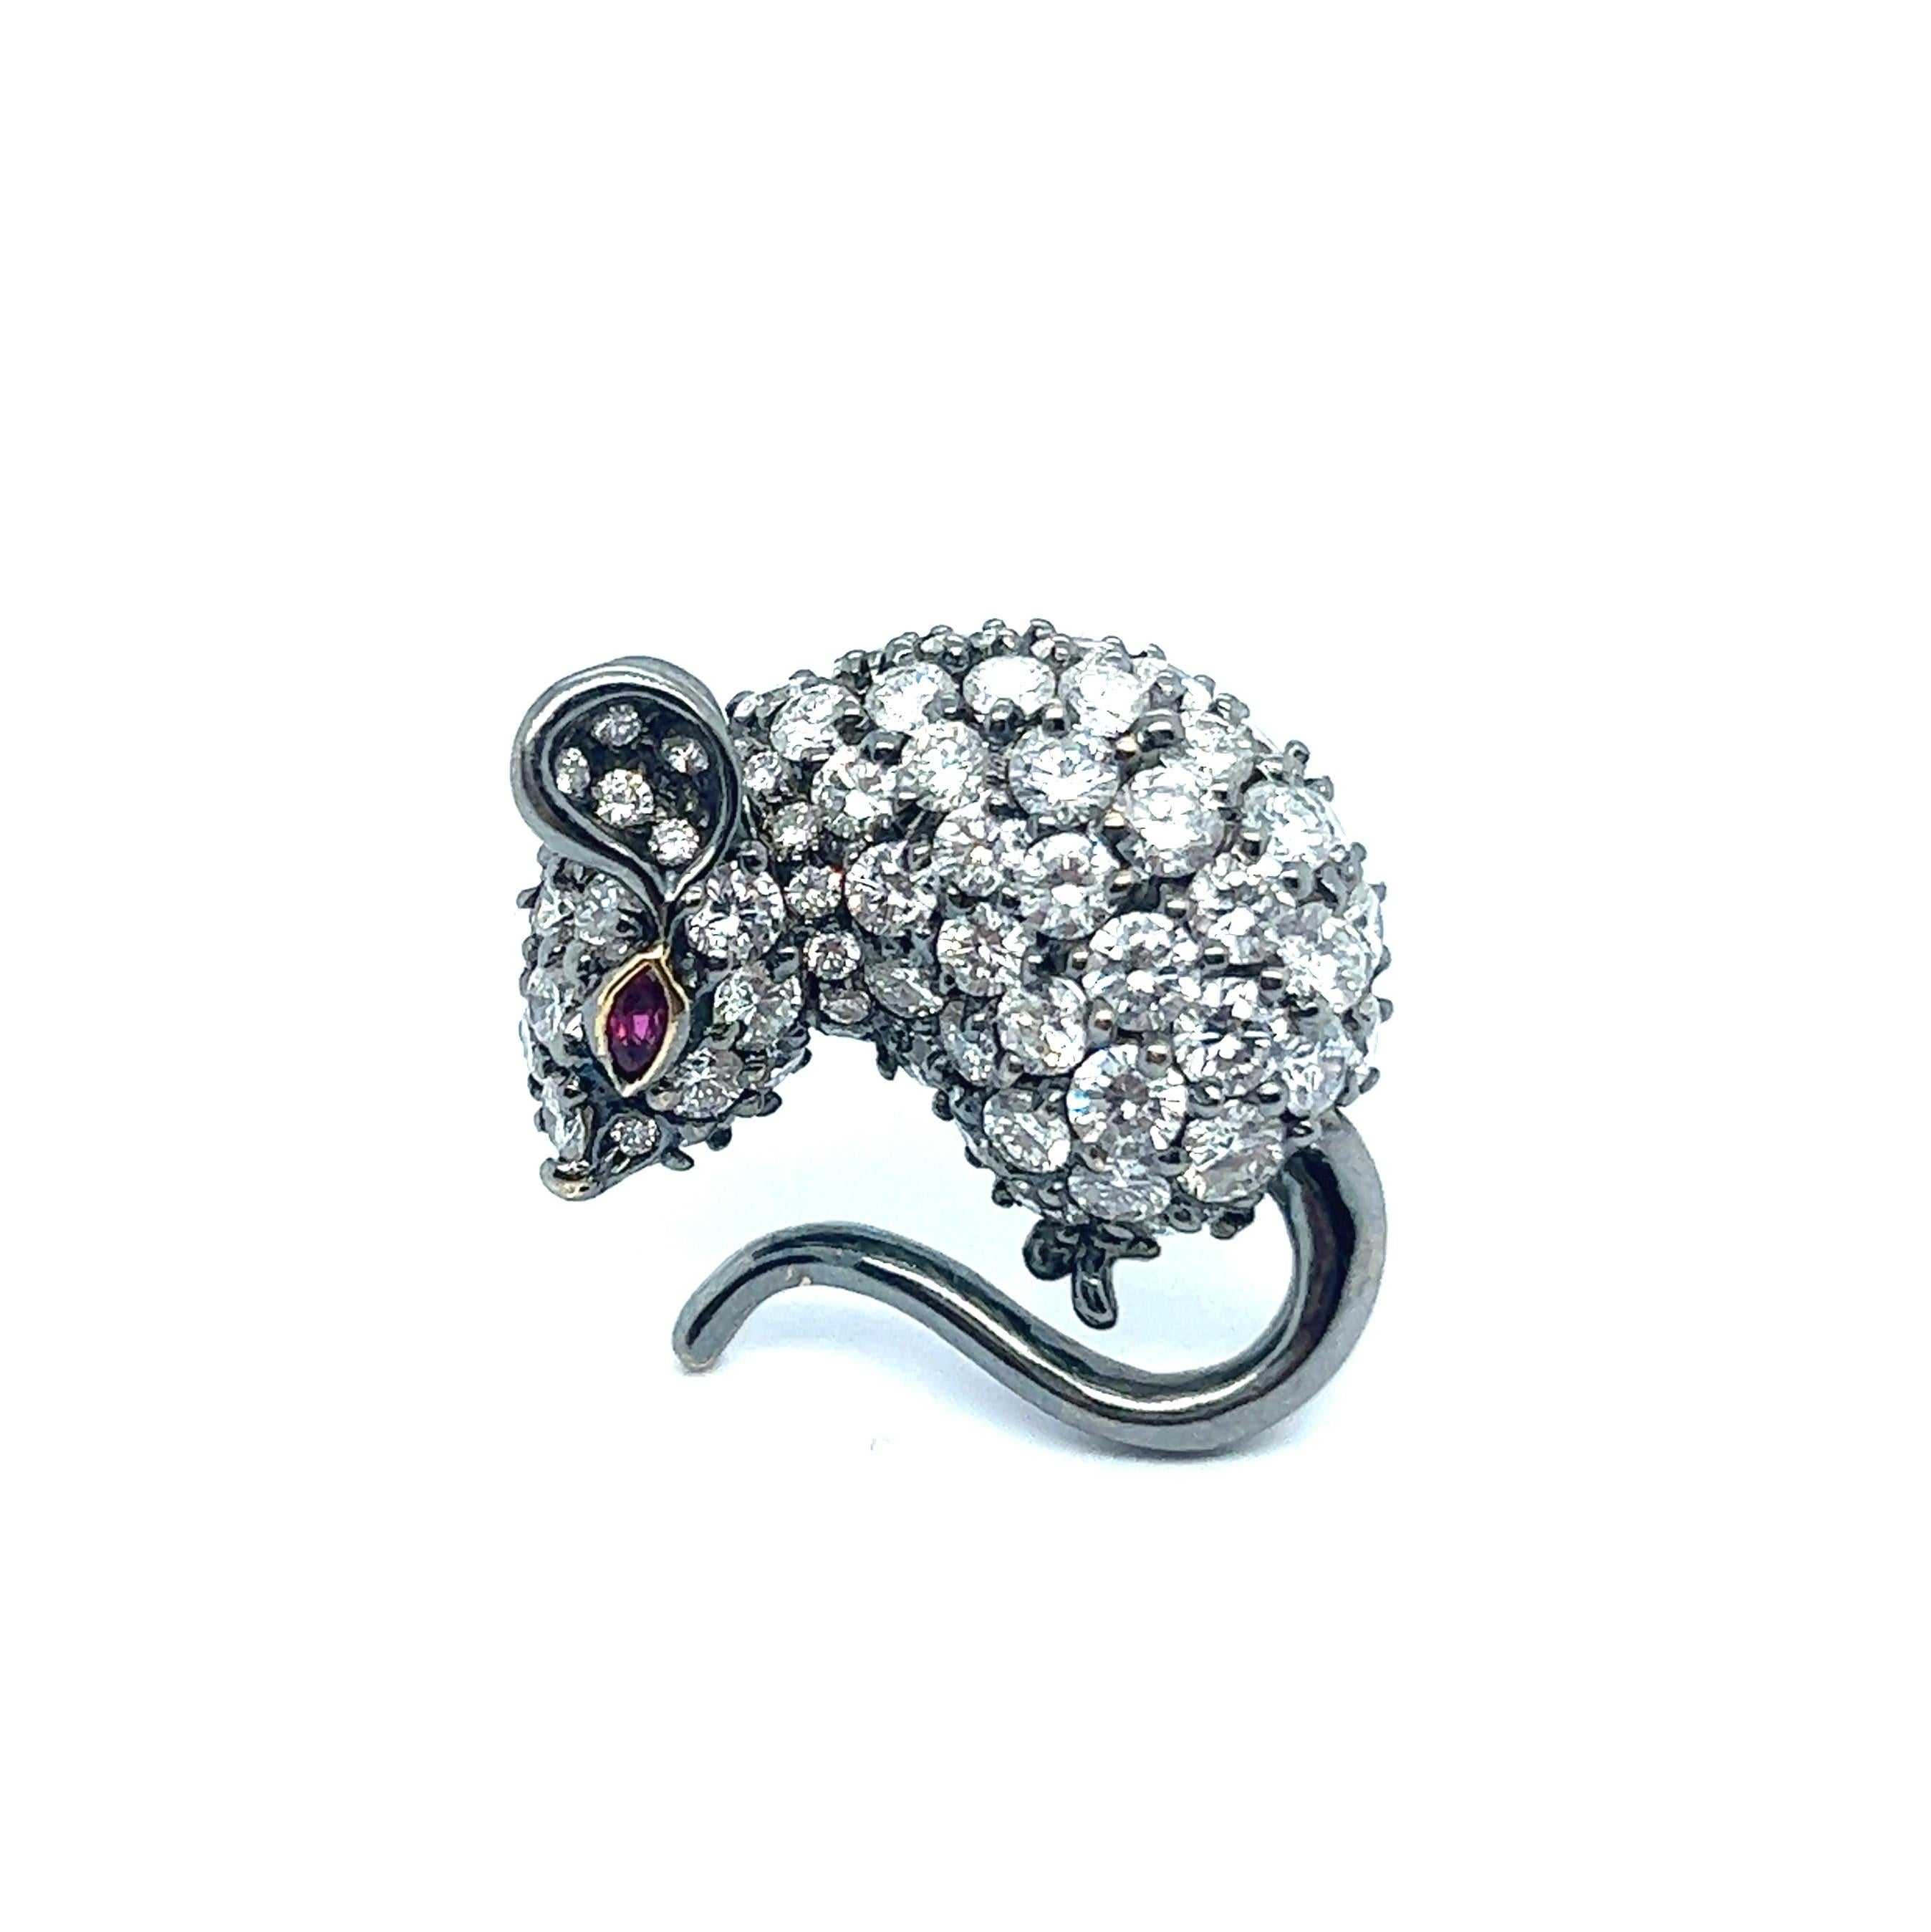 Inspired by the fascination for the nature and animals in particular, this cute bijoux brings joy to old and young.  Its playful body is covered with 68 brilliants of F/G-vs quality totaling 3.30 carats.  A charming accent is the eye of a mousekin